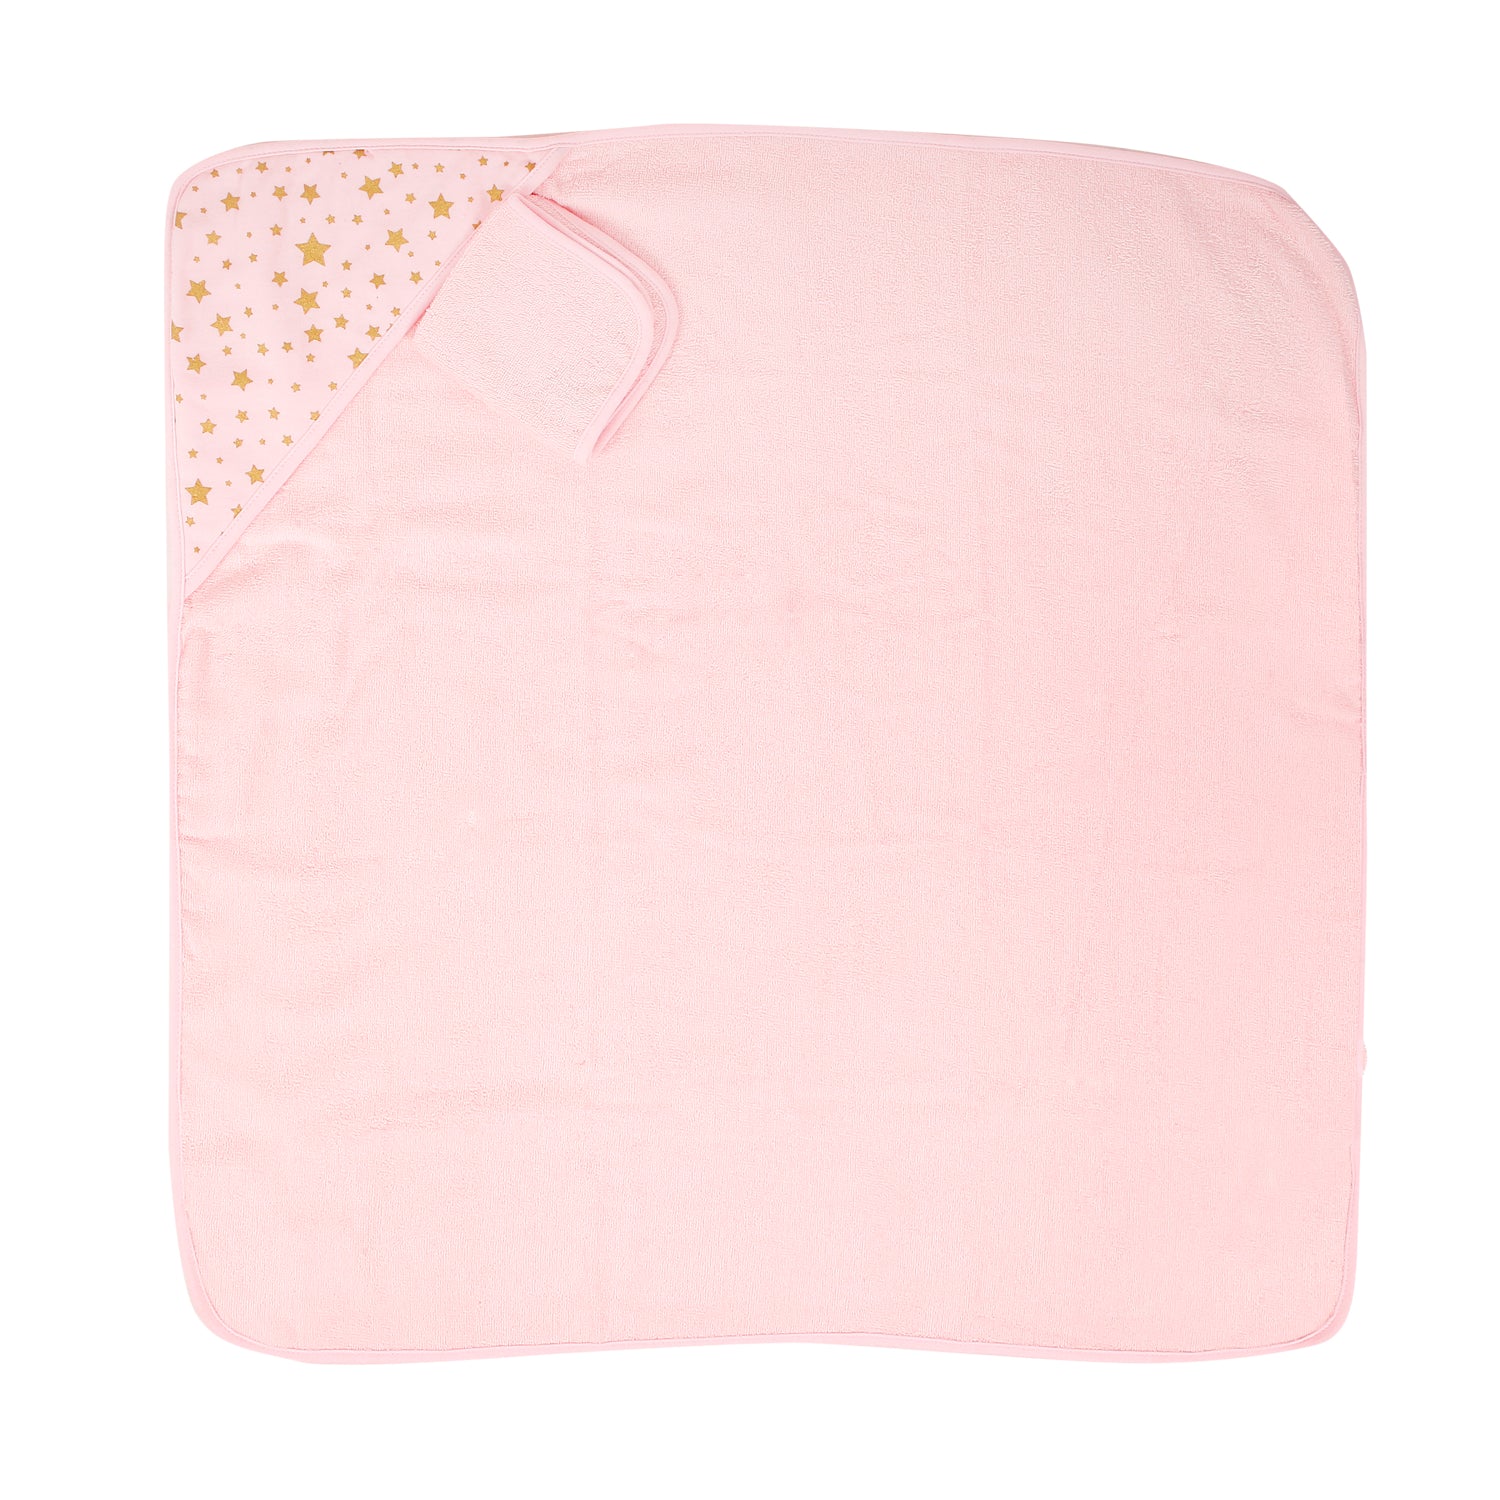 Starry Pink Hooded Towel & Wash Cloth Set - Baby Moo